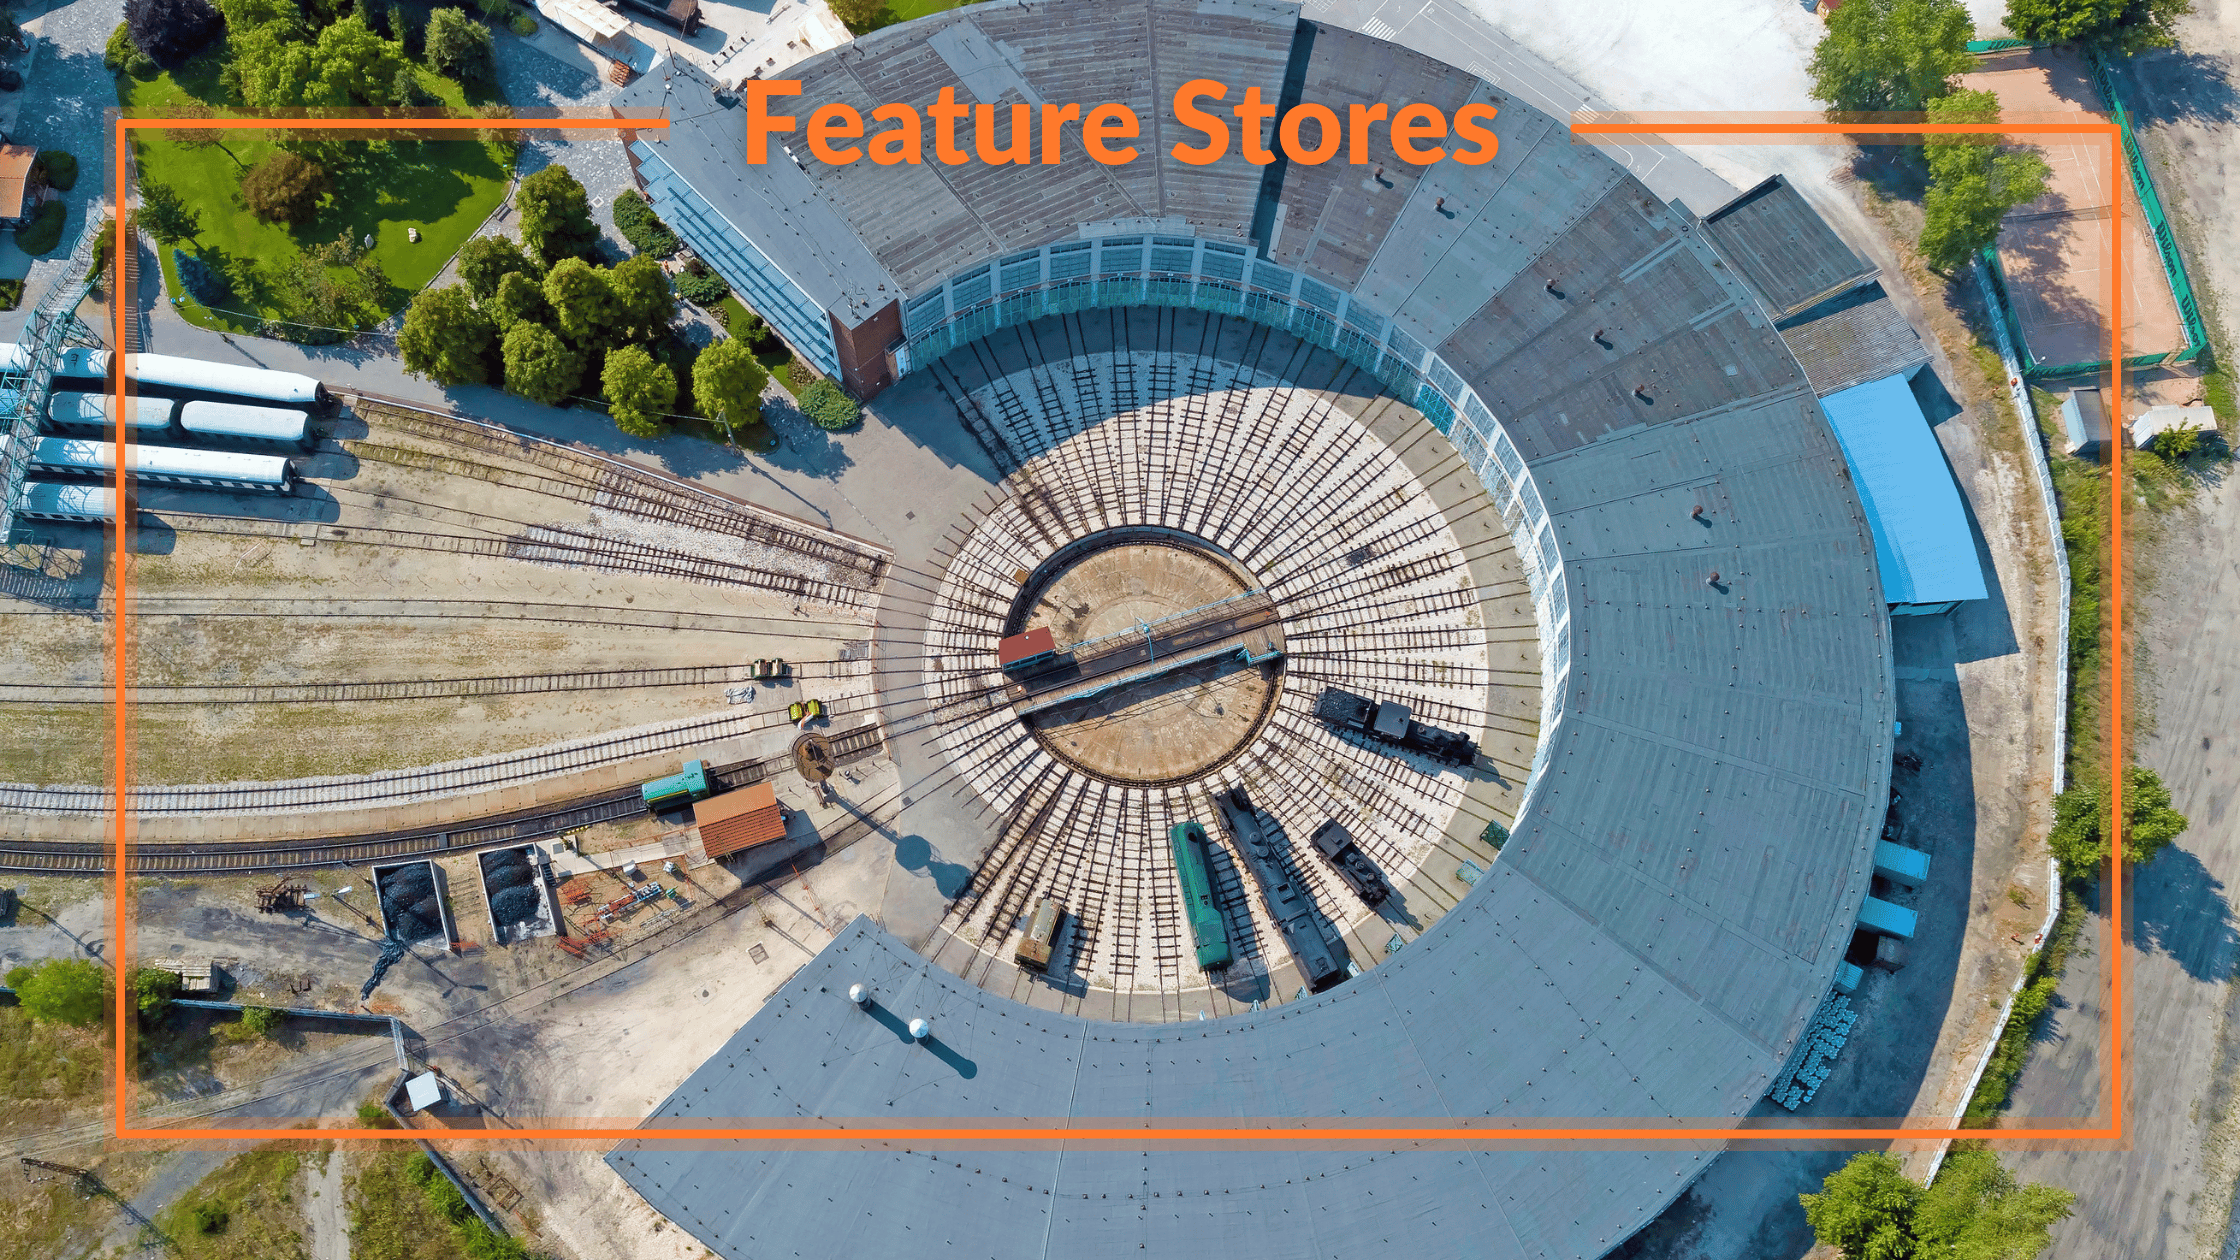 Feature Stores